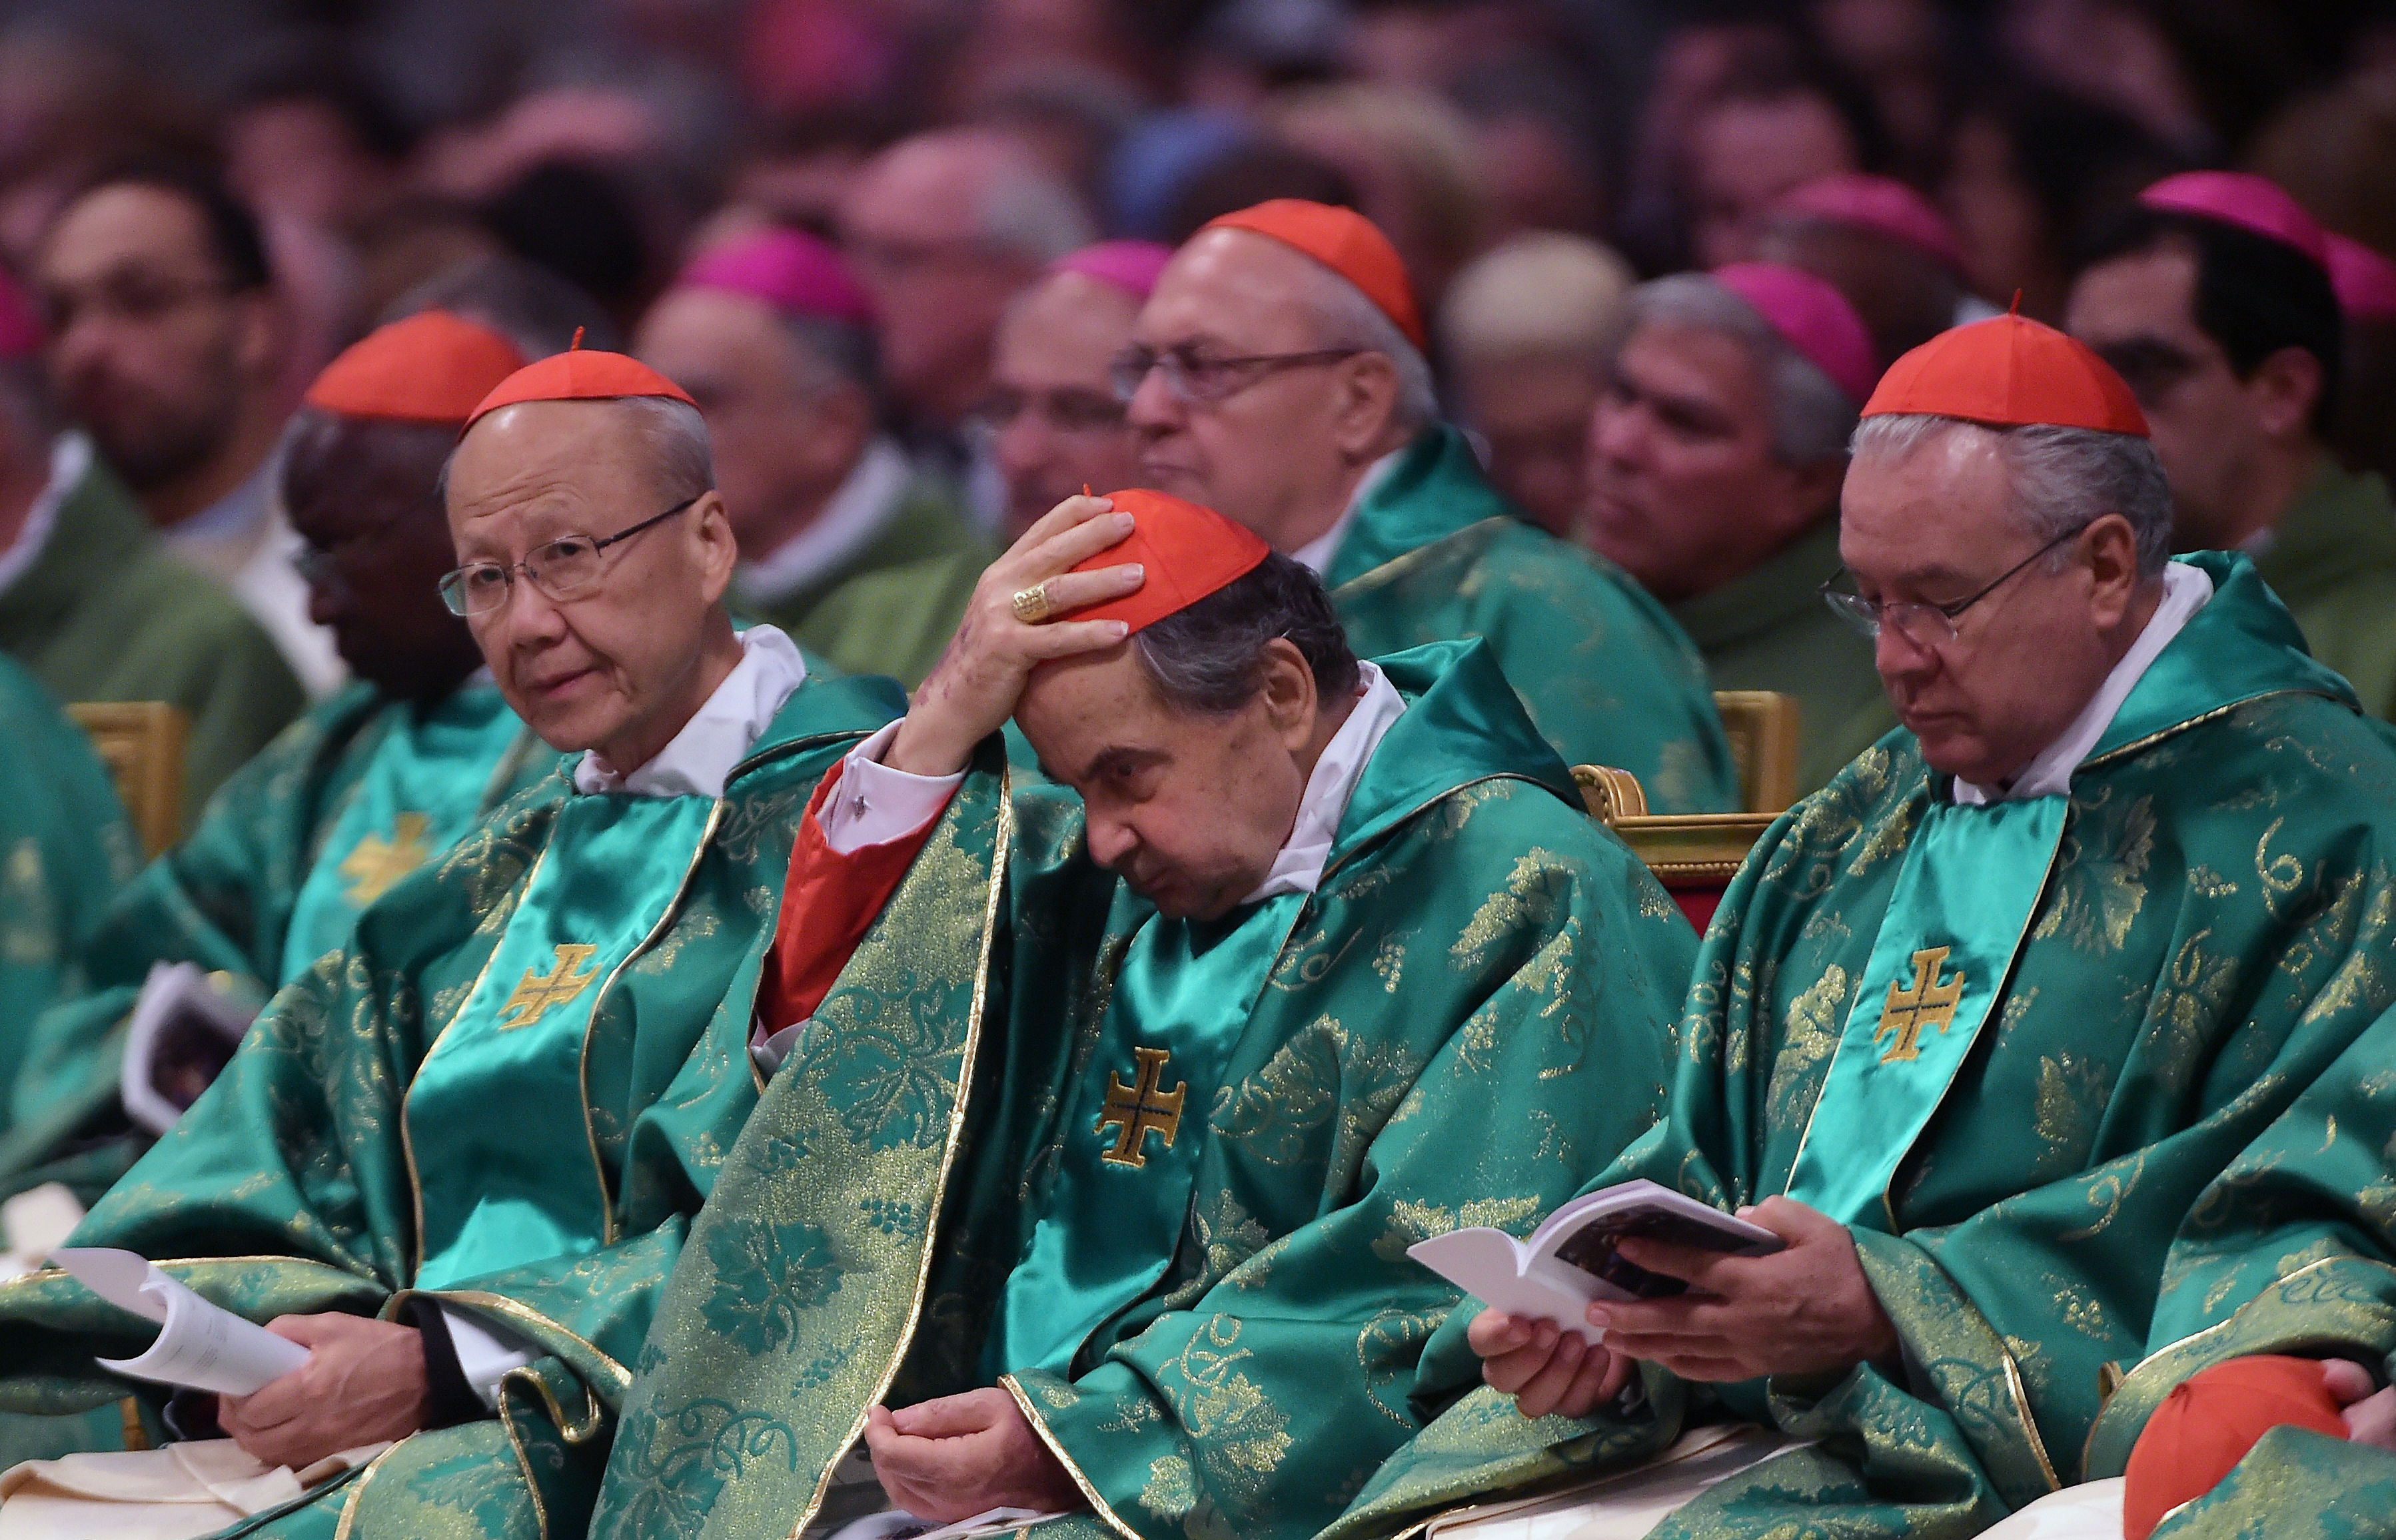 Pope announces theme of next Synod of Bishops